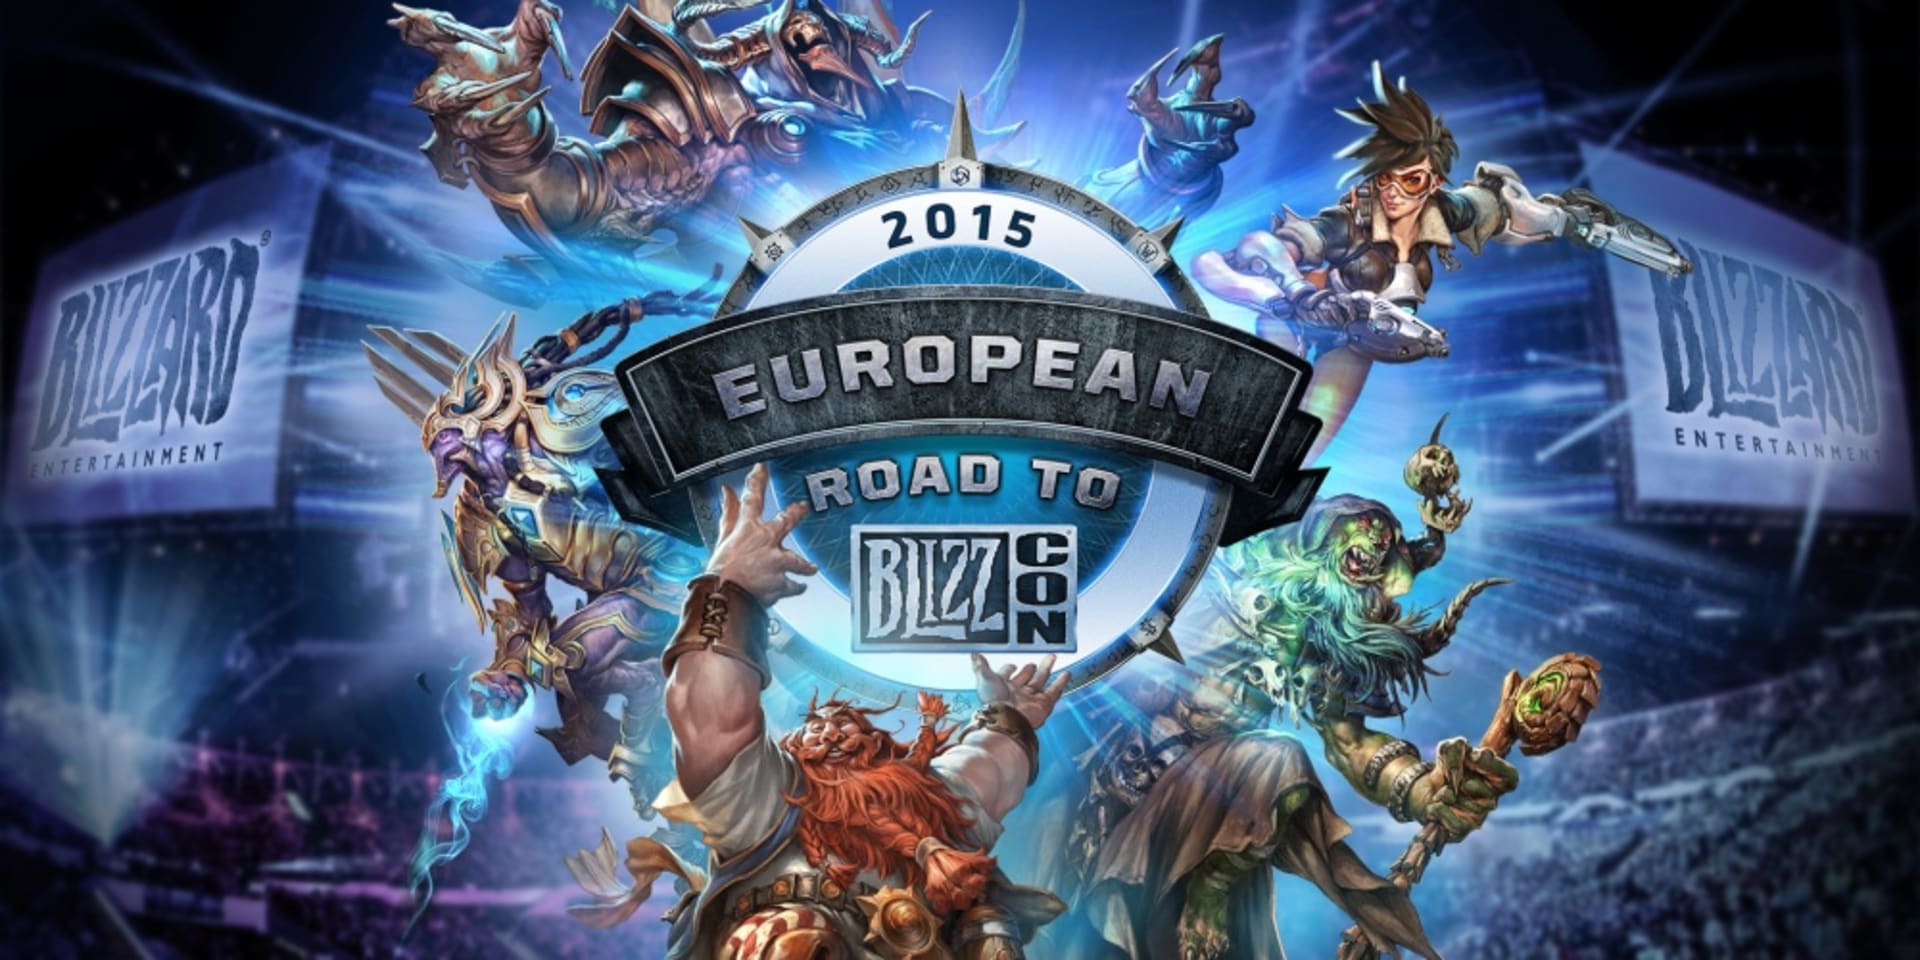 Road to Blizzcon 2015